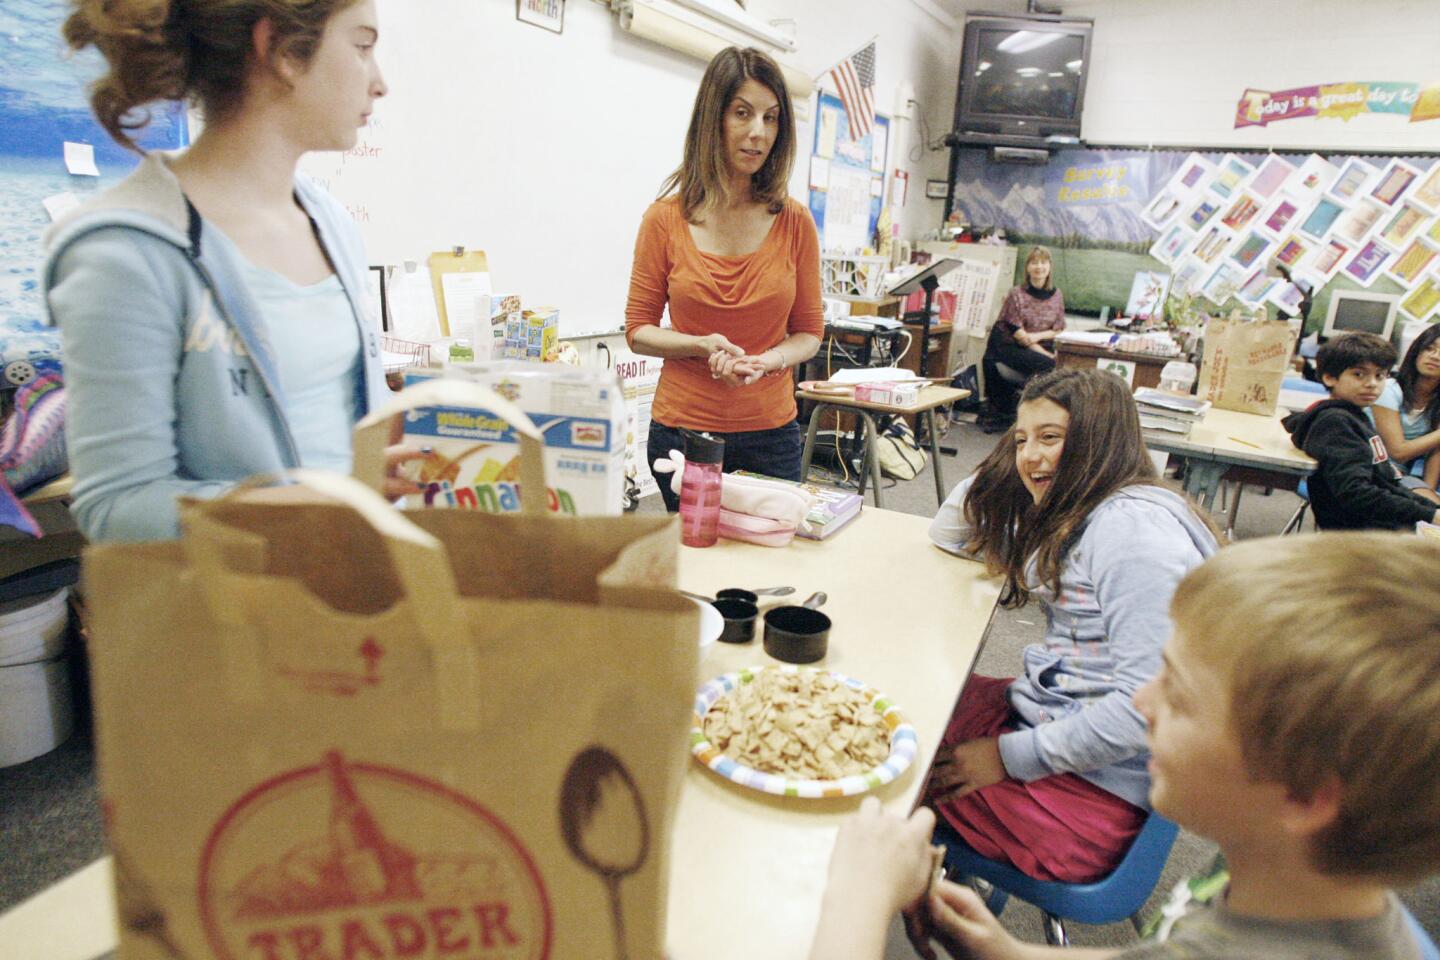 Wendy Crump, from top center (clockwise), asks sixth-grade students Brittany Lerian, Timmy Fejtek and Rebecca Klein questions about the nutritional label at La Canada Elementary School on Wednesday, February 22, 2012. The school celebrated nutrition week. "We empower children to make healthy food choices," Crump says. Crump is a registered nutritionist.